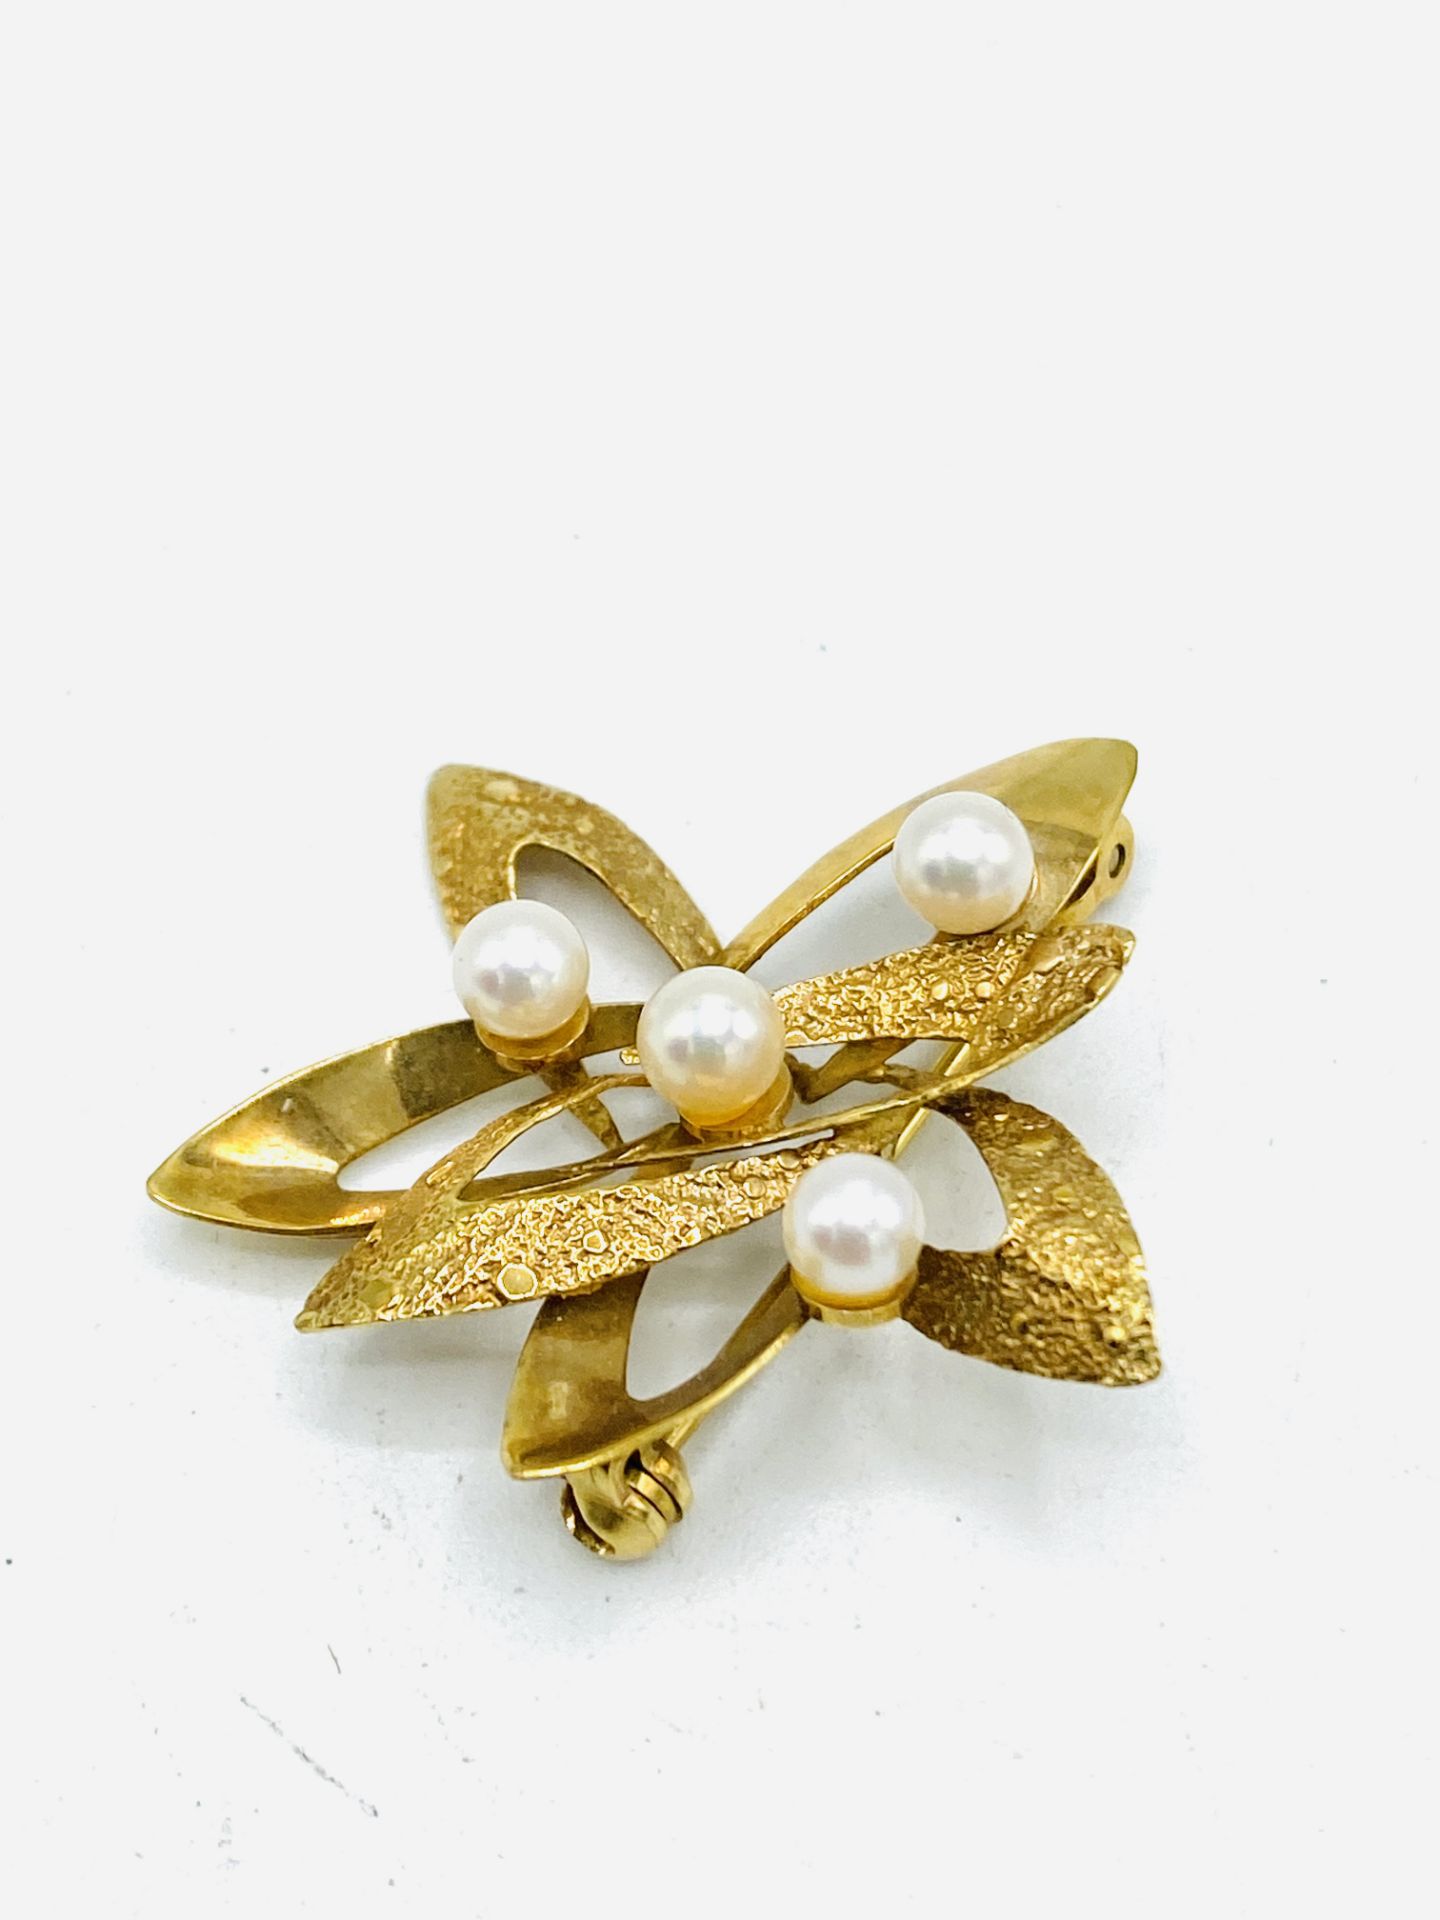 9ct gold brooch set with pearls - Image 2 of 5